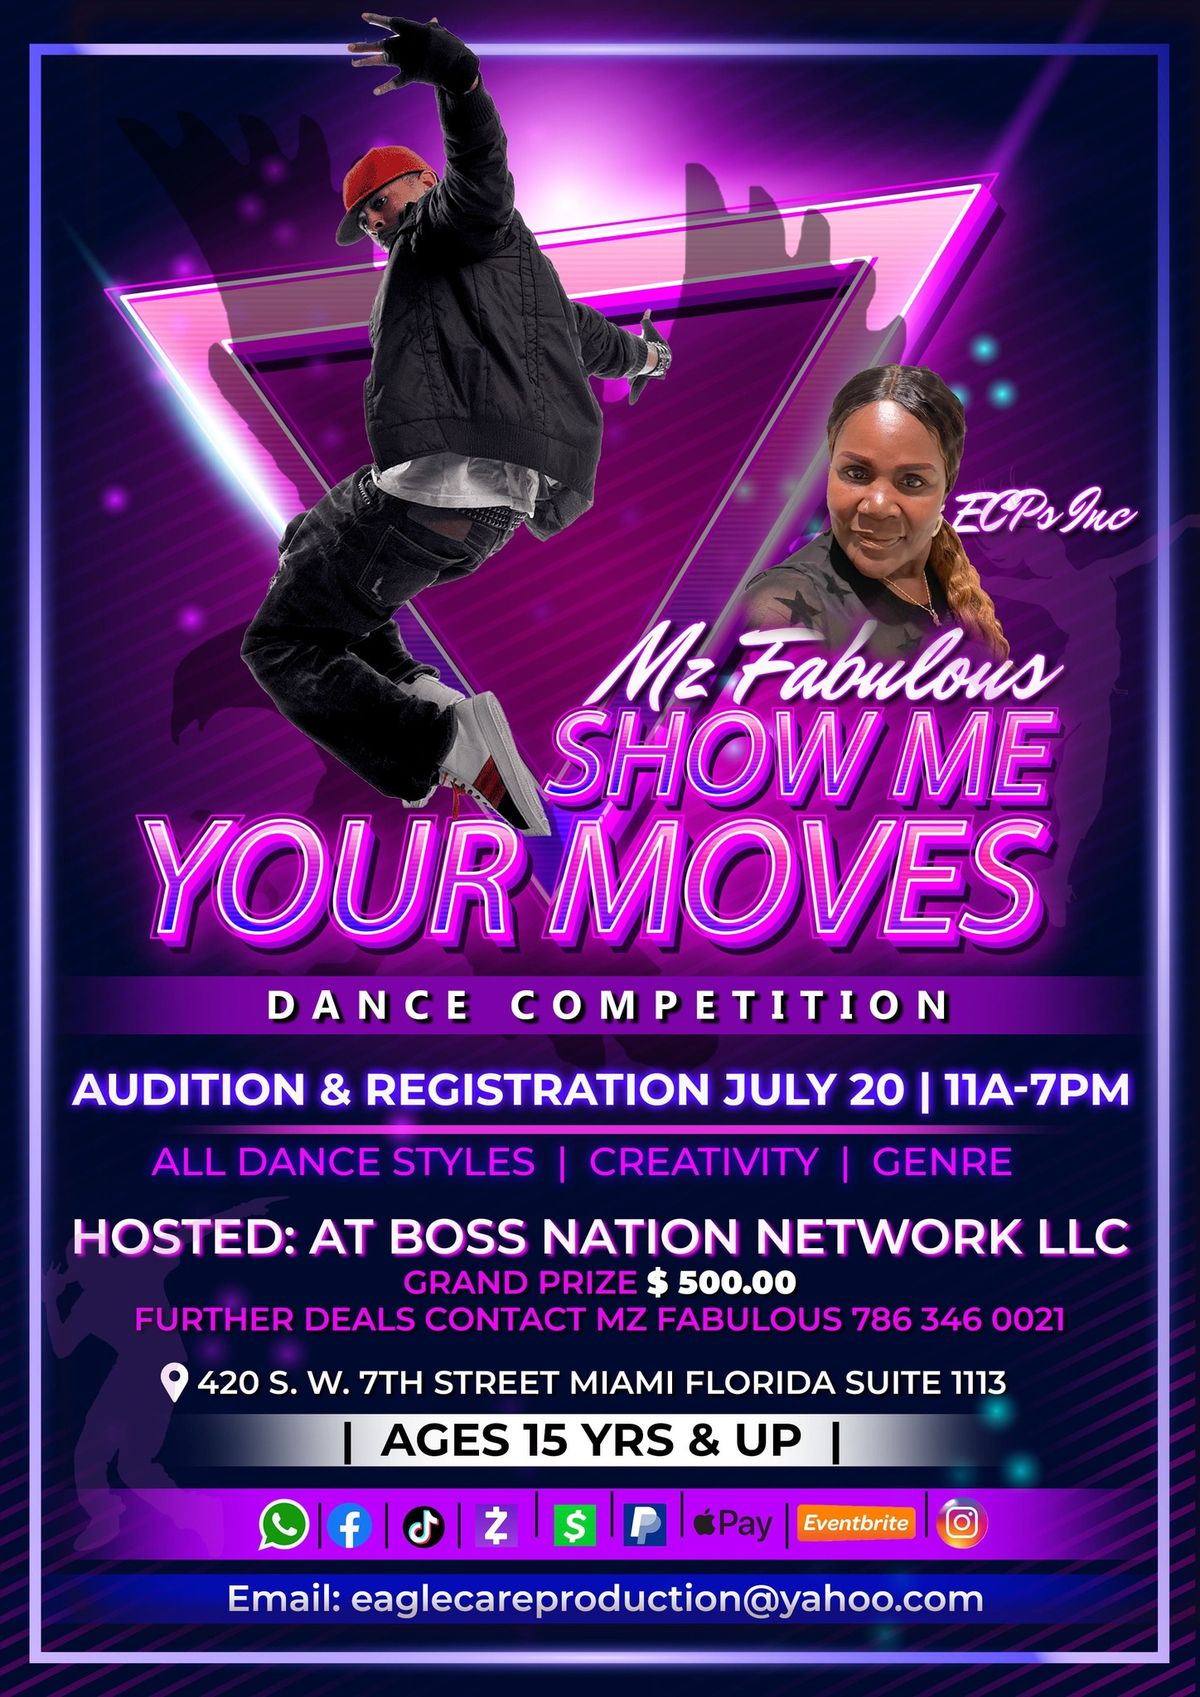 Mz Fabulous SHOW ME Your Moves Dance Competition 